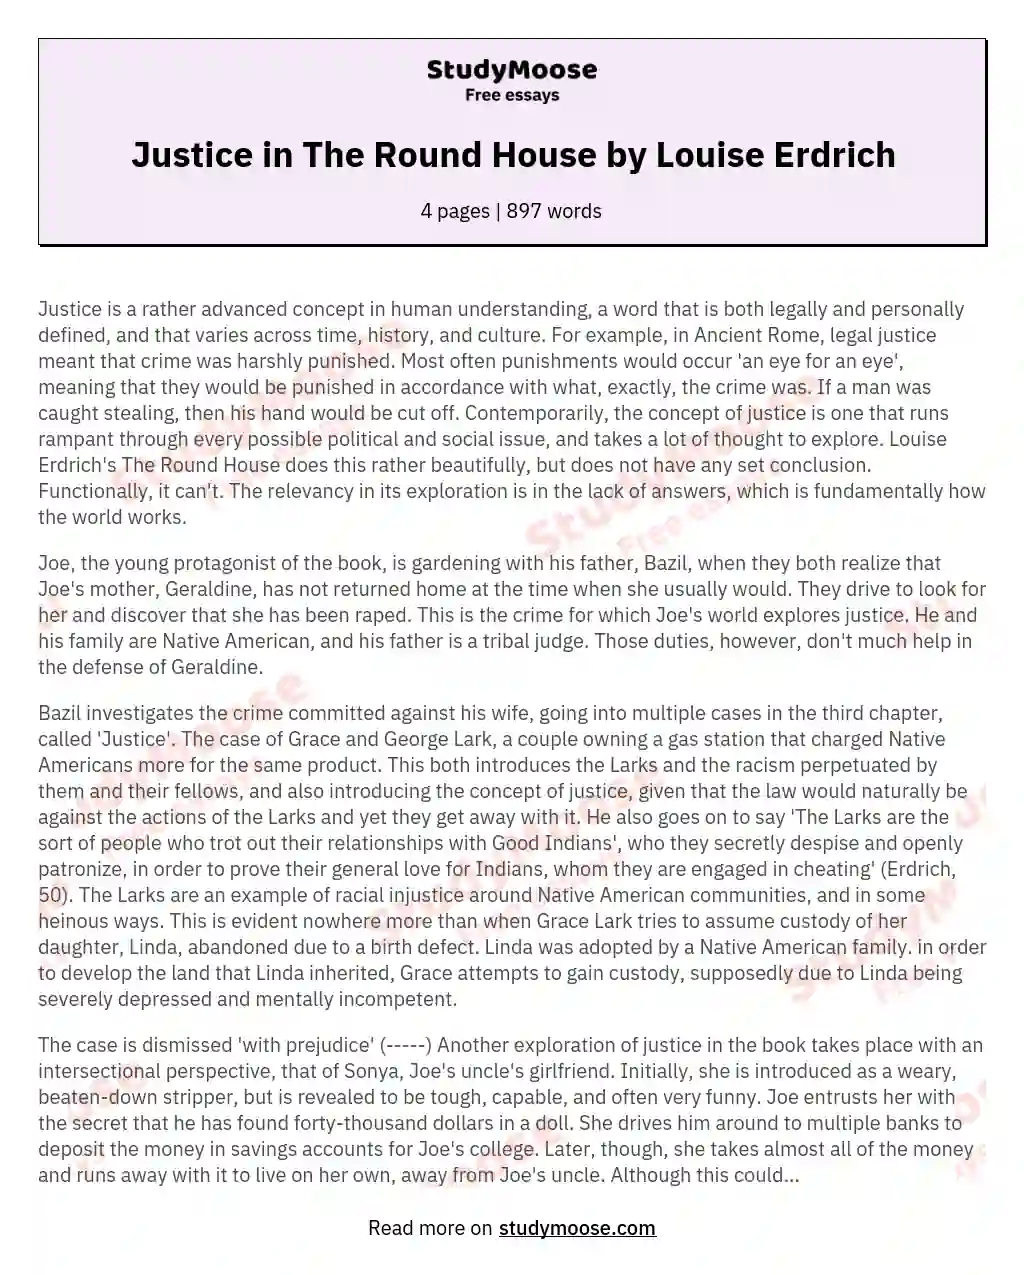 Justice in The Round House by Louise Erdrich essay